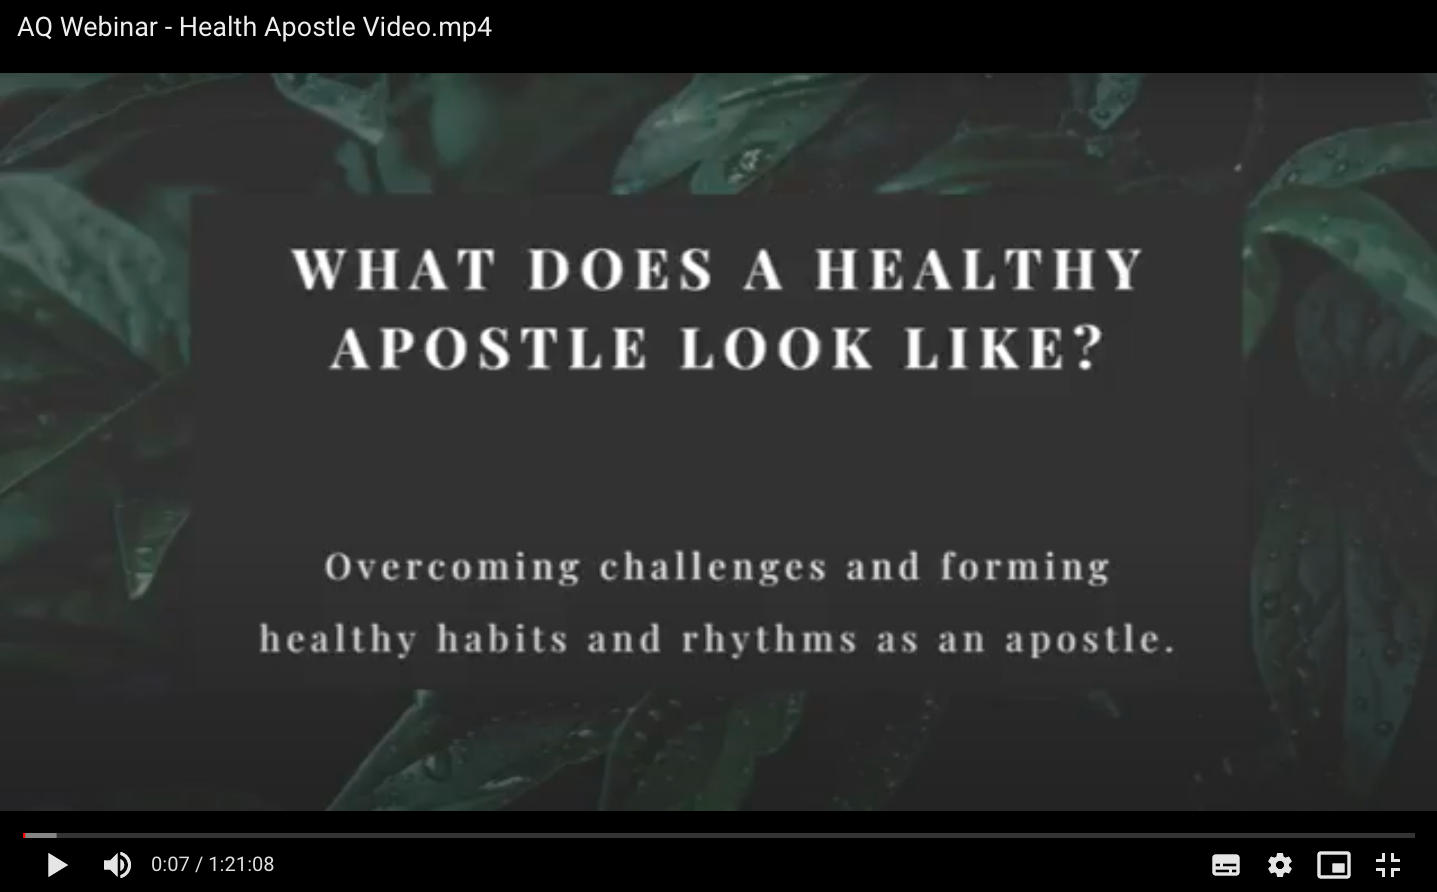 What Does a Healthy Apostle Look Like?